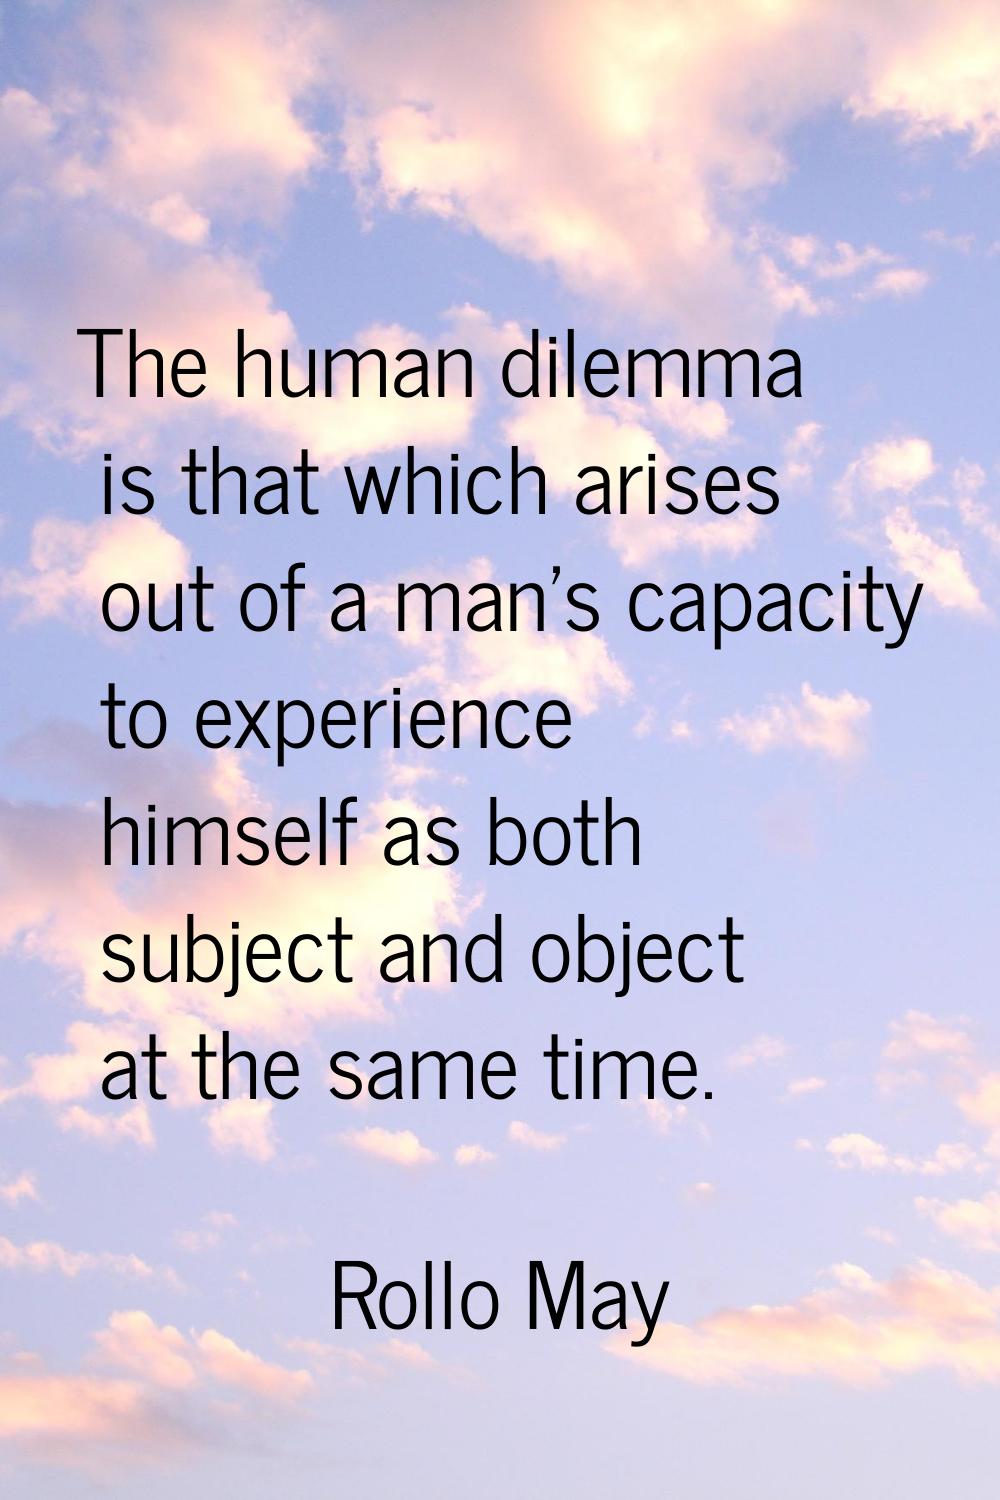 The human dilemma is that which arises out of a man's capacity to experience himself as both subjec